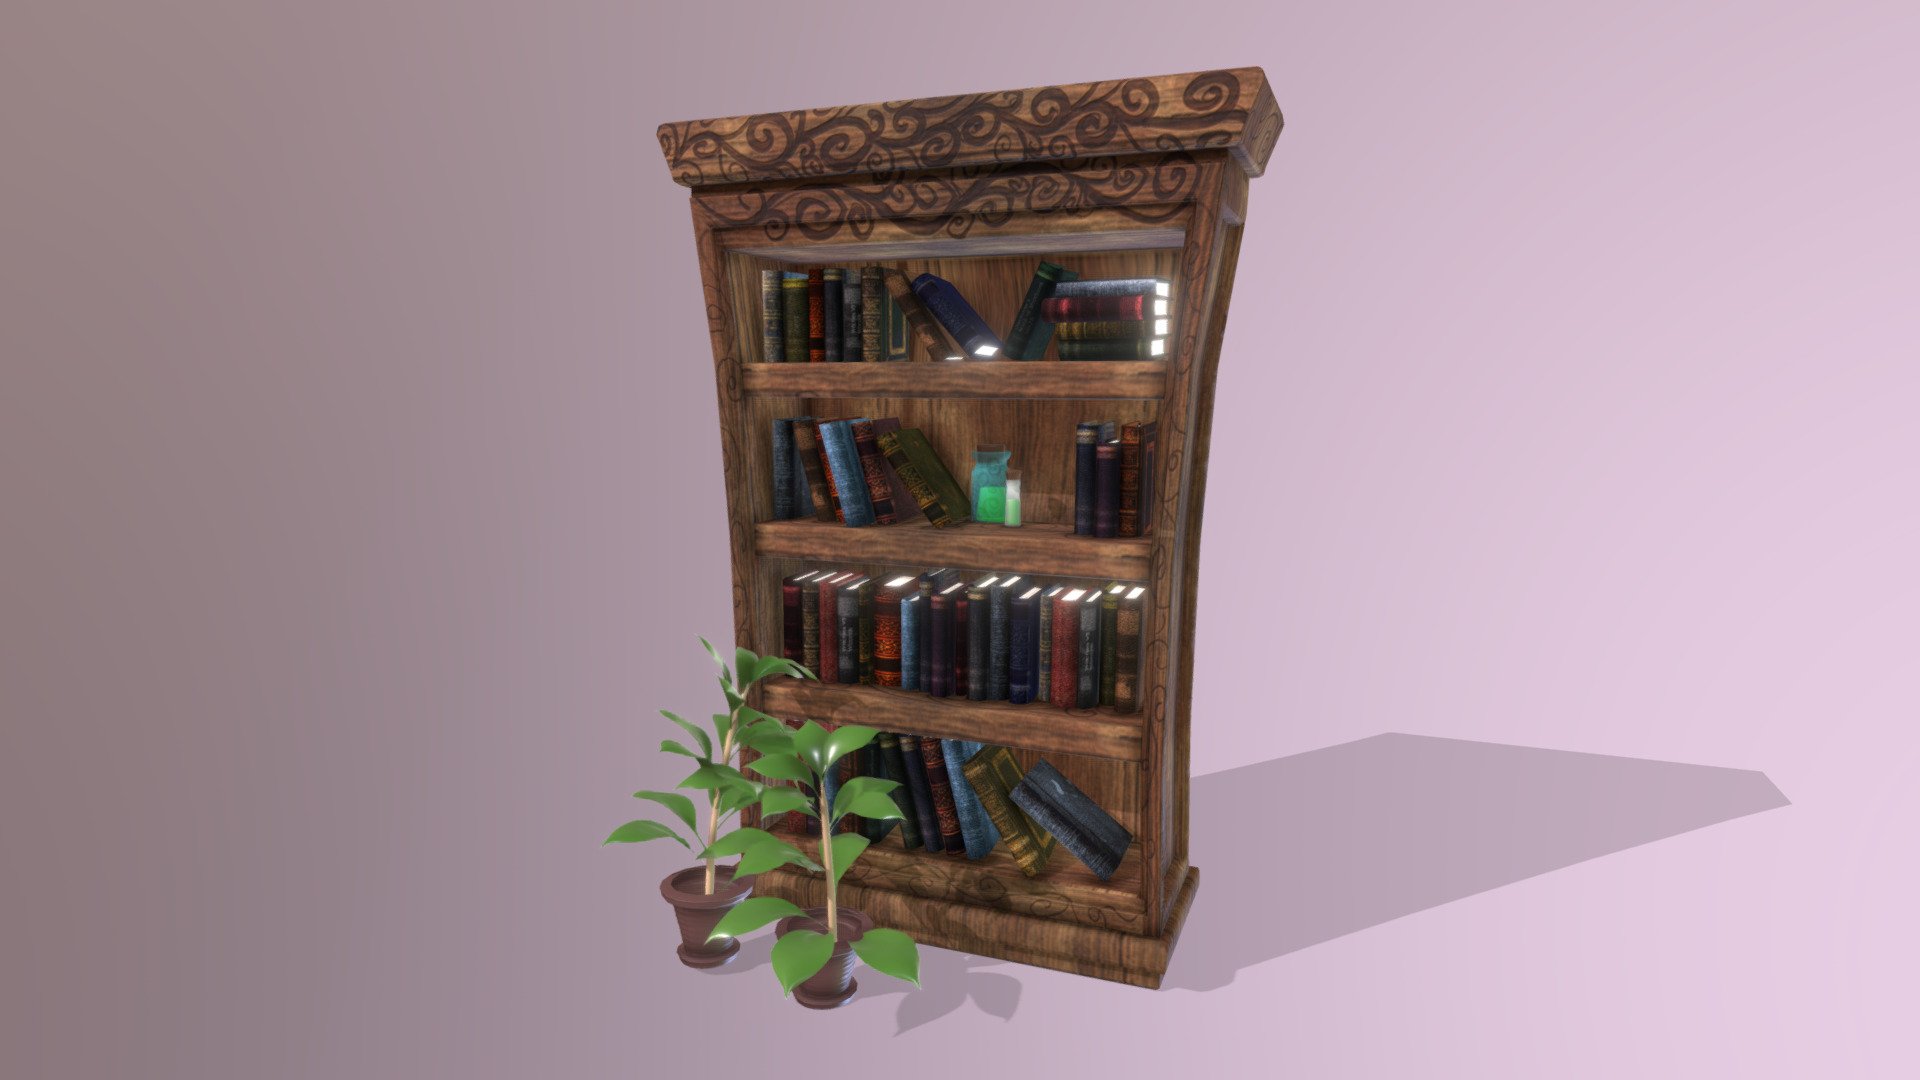 This is an asset that was used in the background of The Little Witch!

Watch The Little Witch here: https://youtu.be/qnELZzQa8UM - The Witch's Bookshelf - Download Free 3D model by sunnytrashpanda 3d model